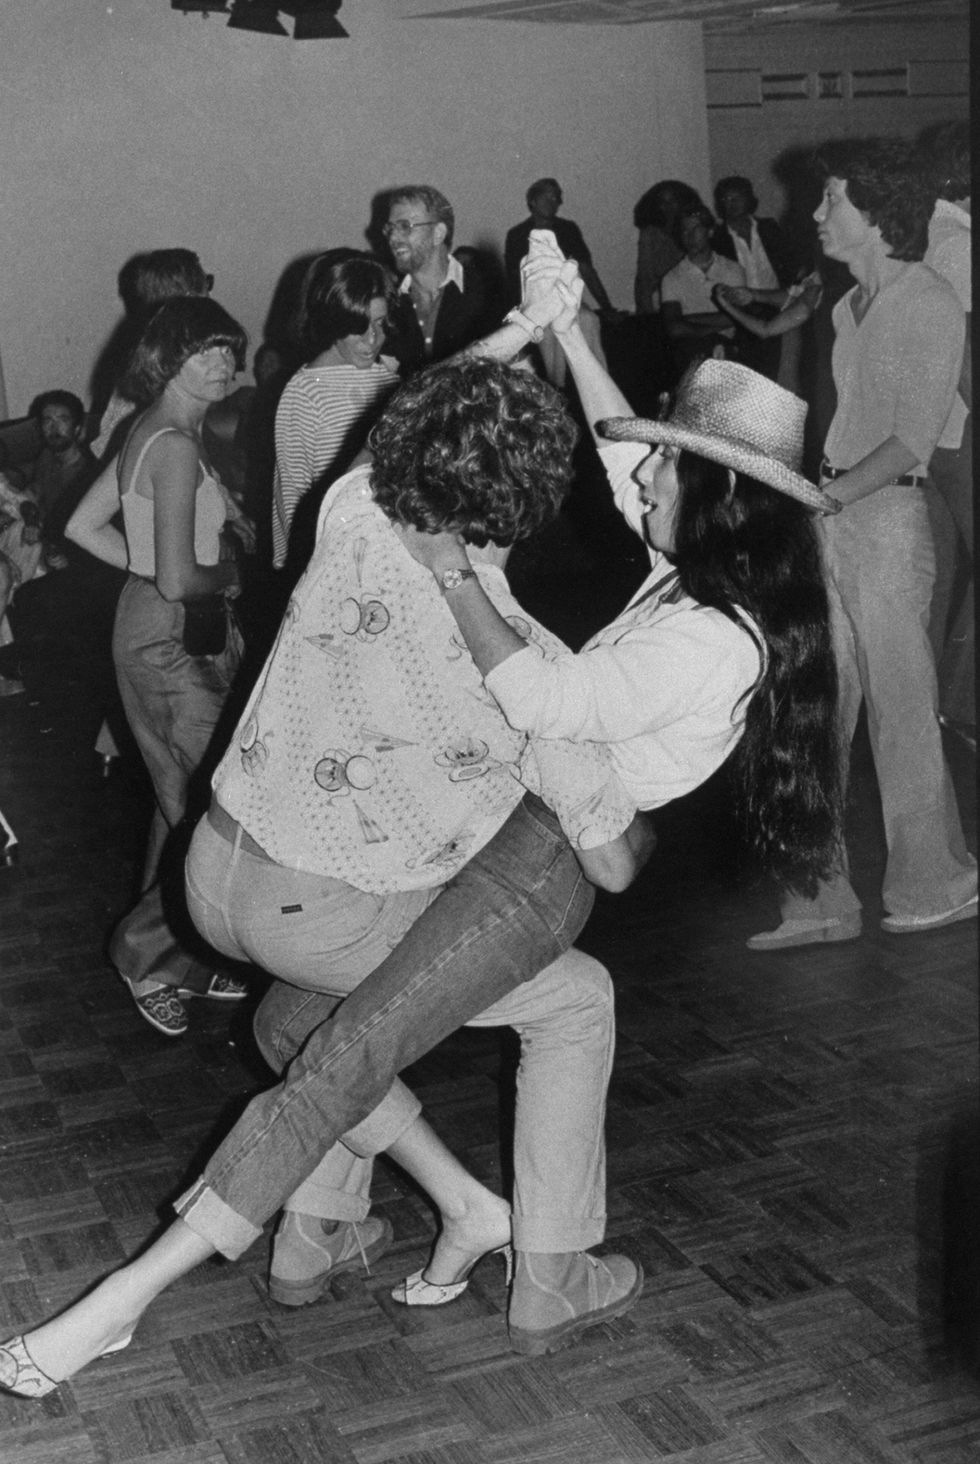 Vintage Photos of Disco Fever and Studio 54 Scene - 40th Anniversary of  The Hustle